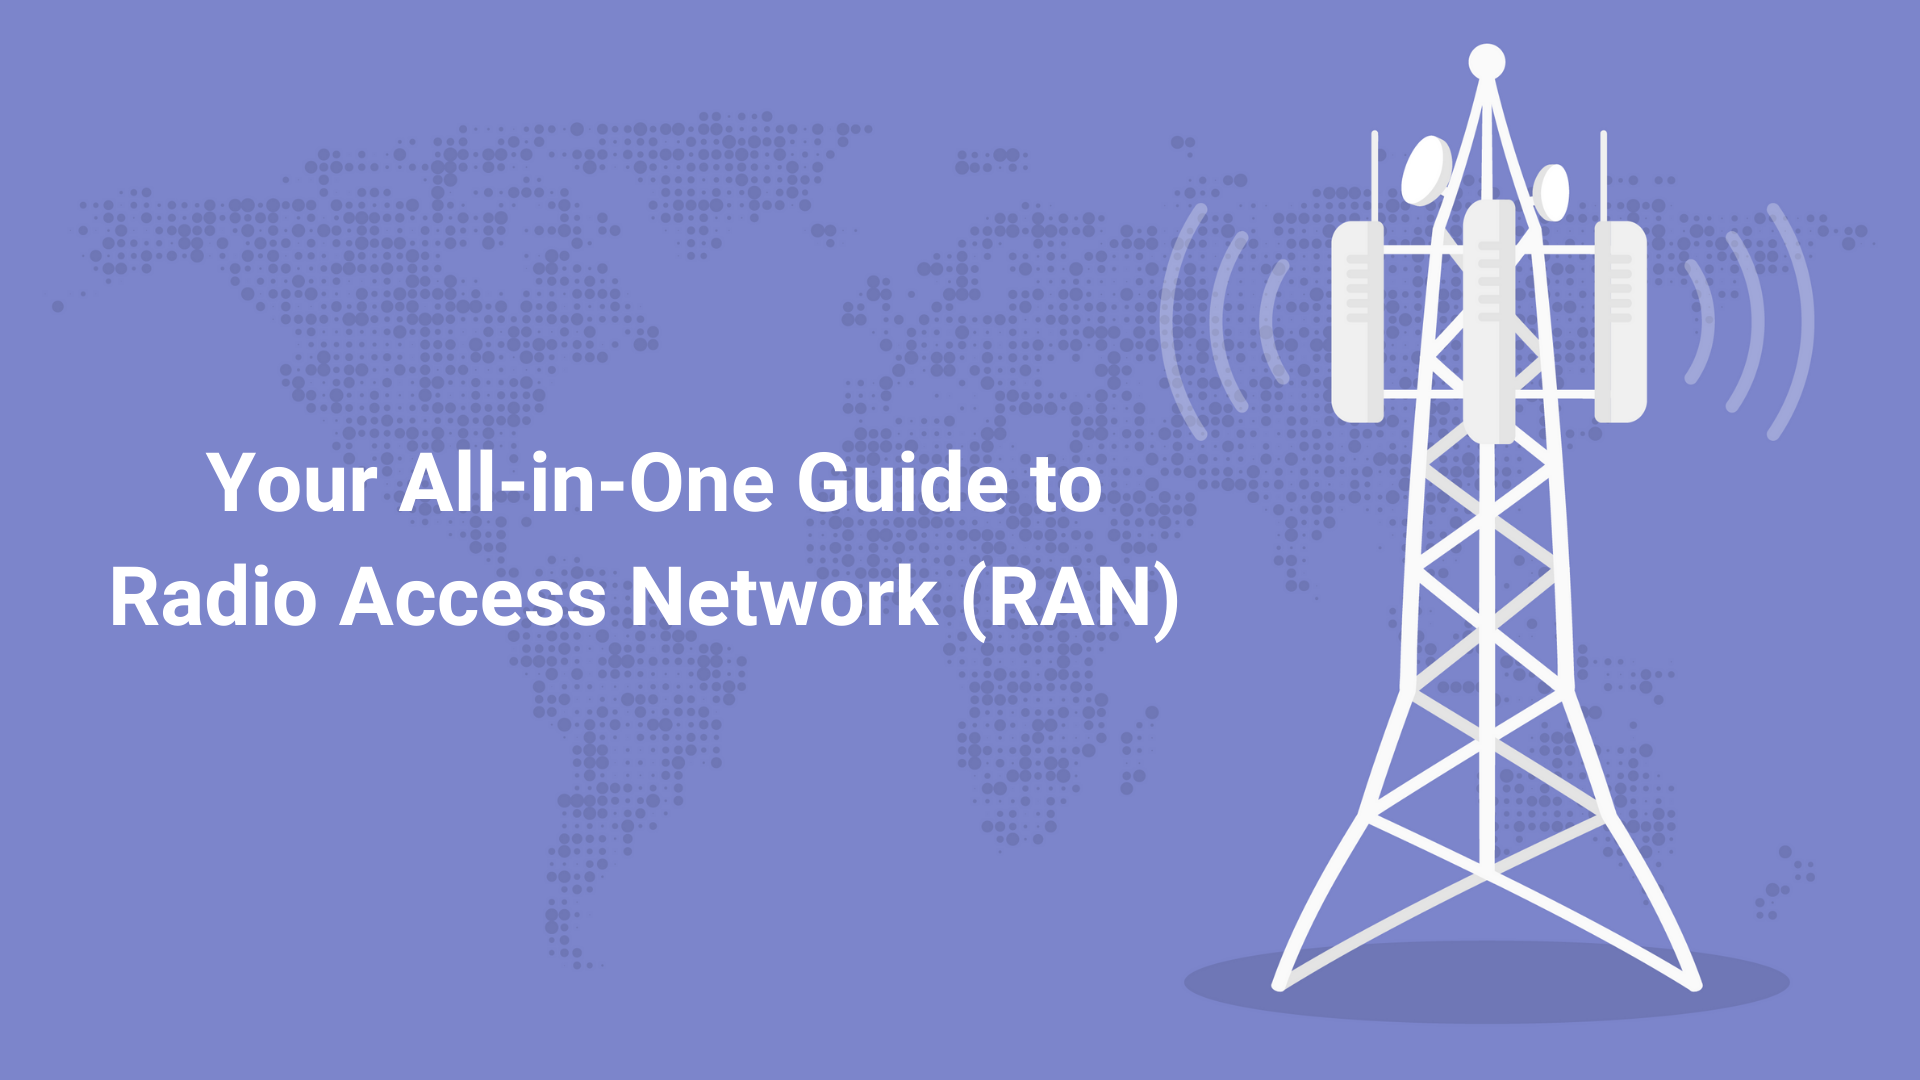 What is Radio Access Network (RAN)?